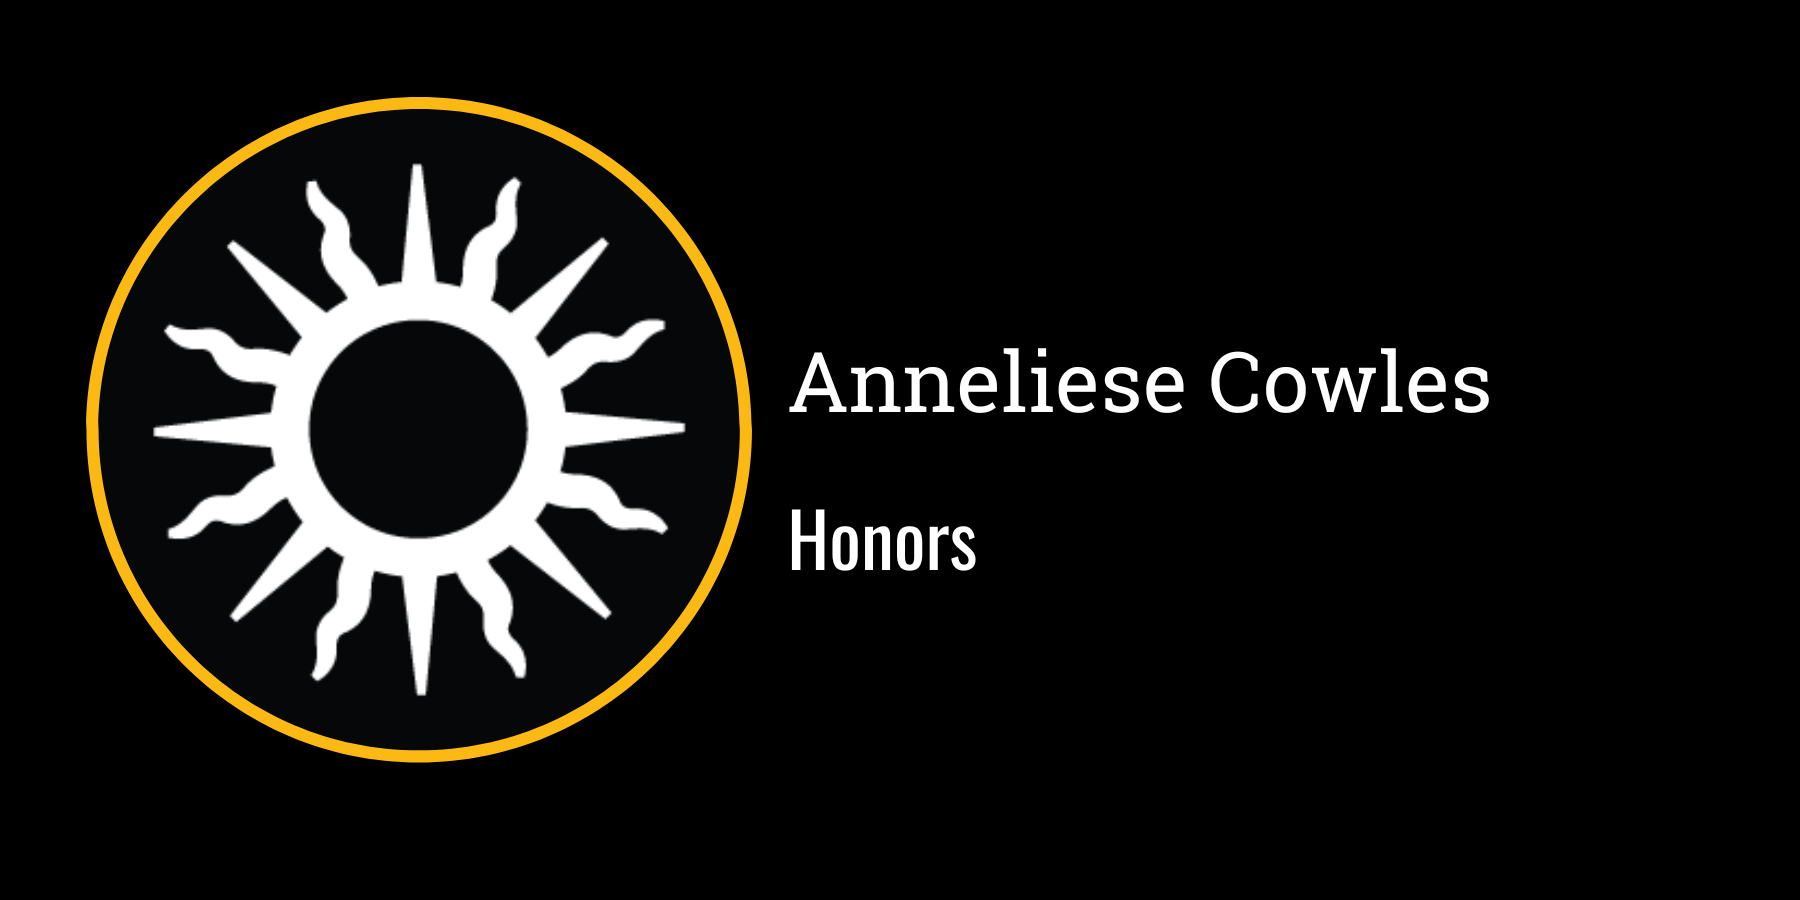 Anneliese Cowles
University Honors